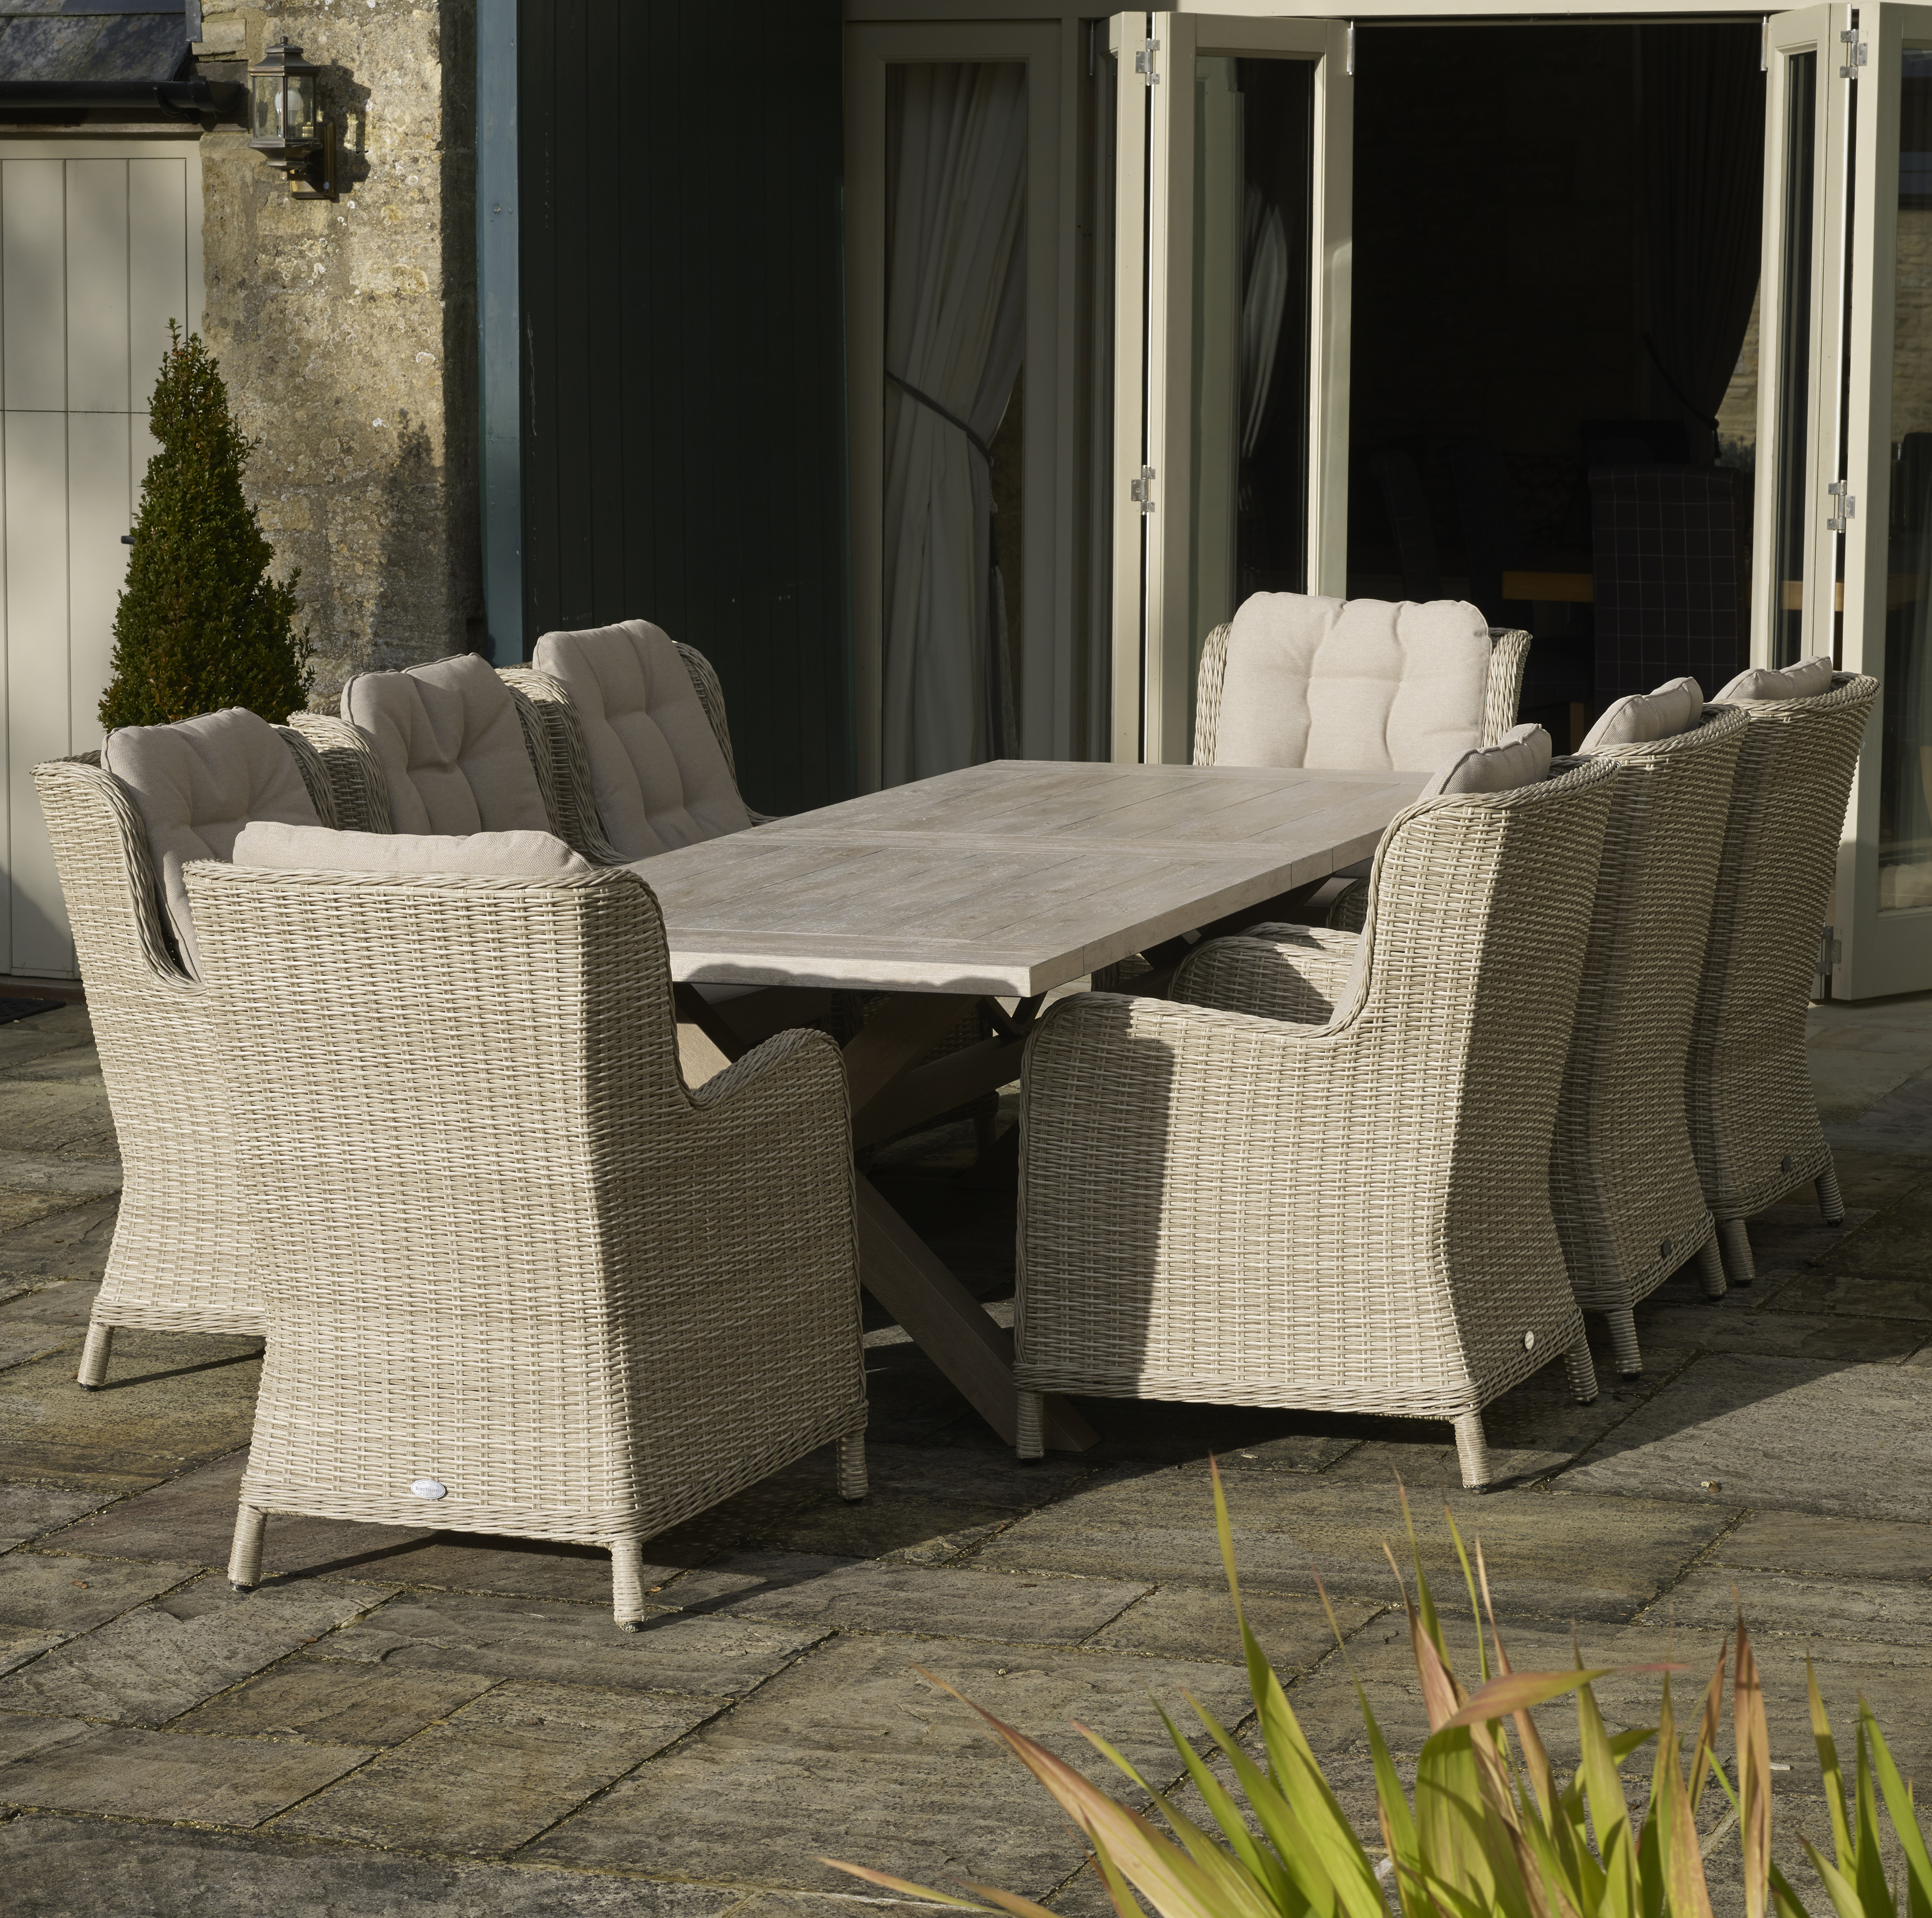 Bramblecrest Chedworth Ceramic Rectangle Table with 8 Rattan Armchairs - Sandstone